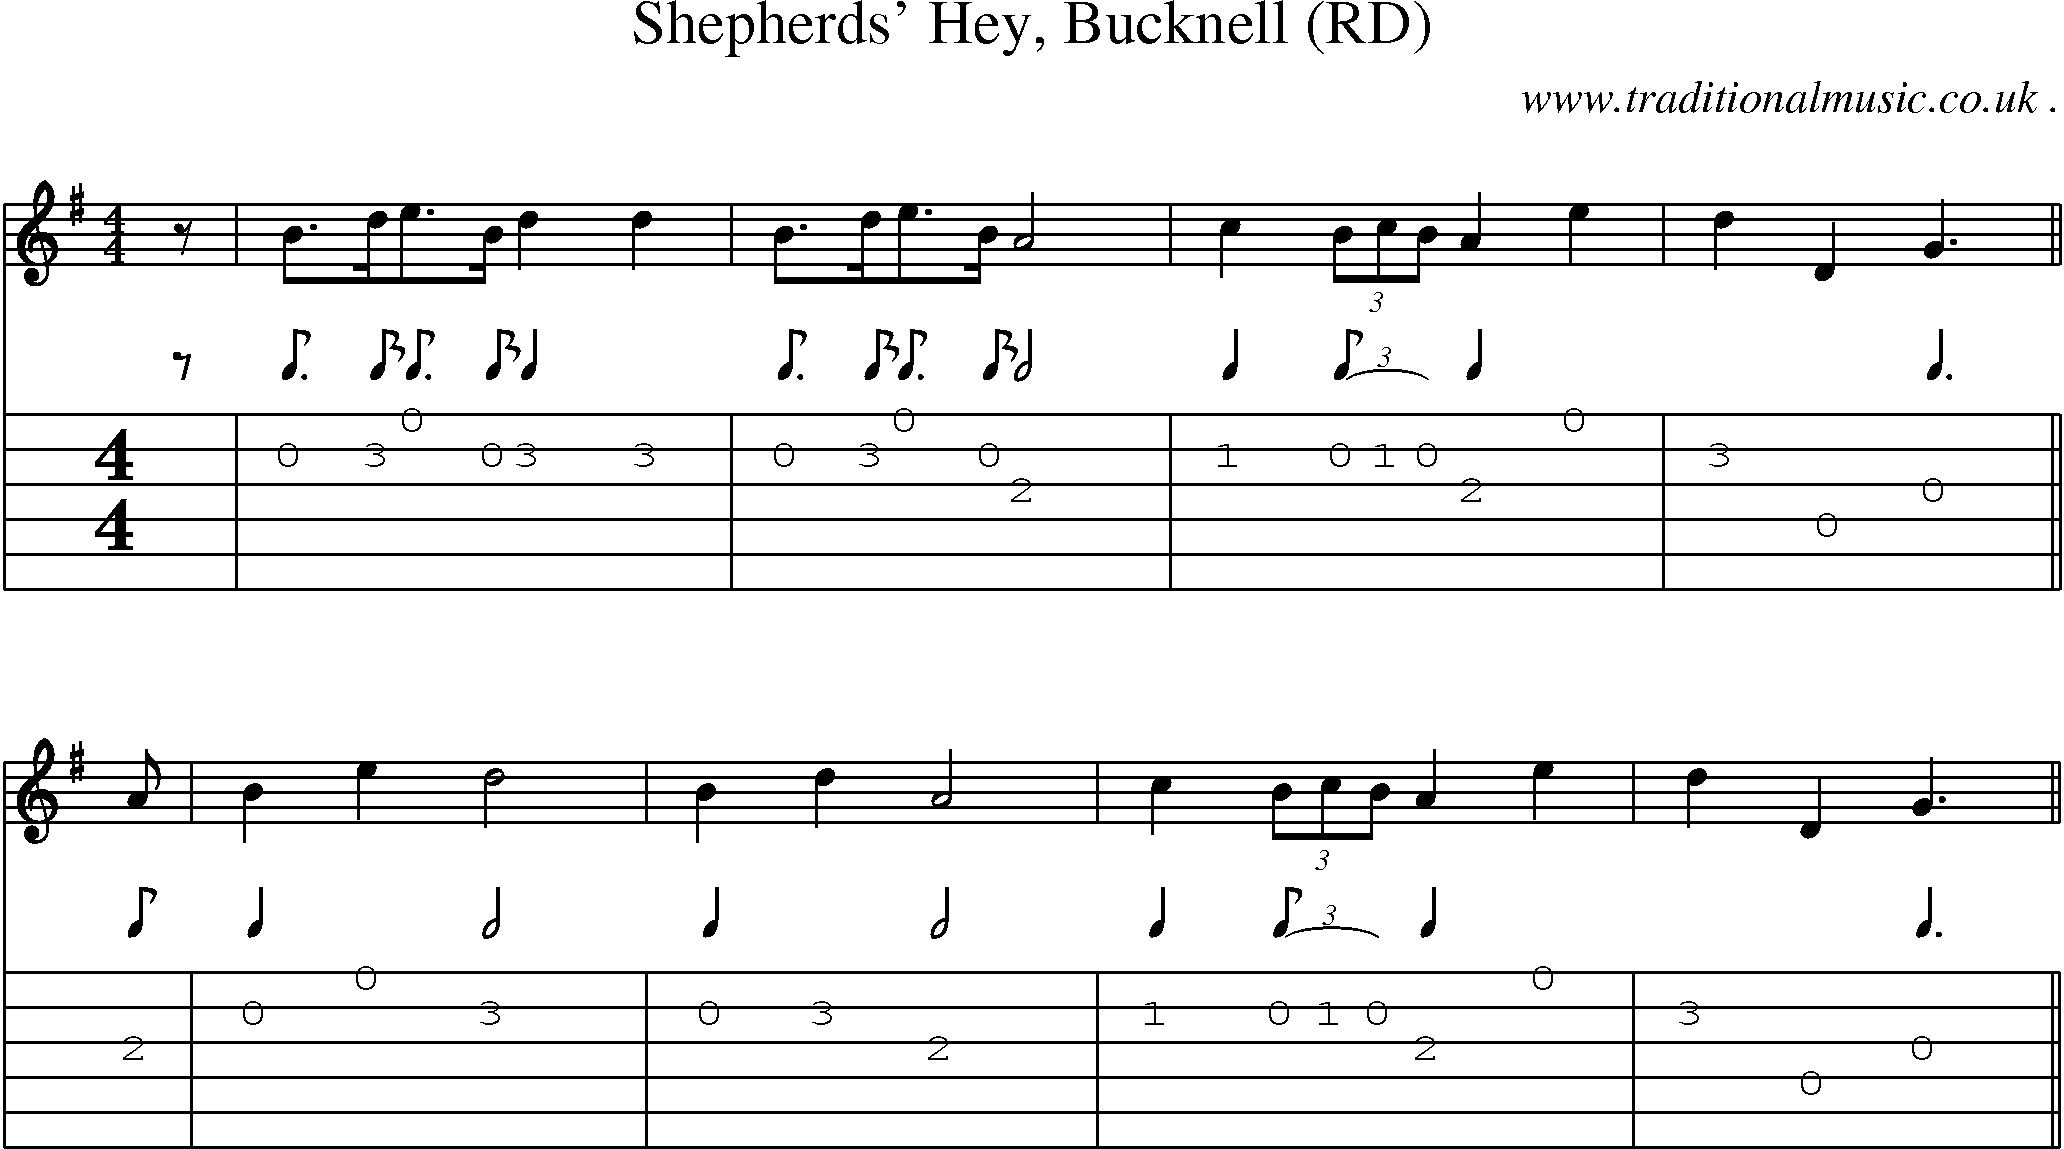 Sheet-Music and Guitar Tabs for Shepherds Hey Bucknell (rd)